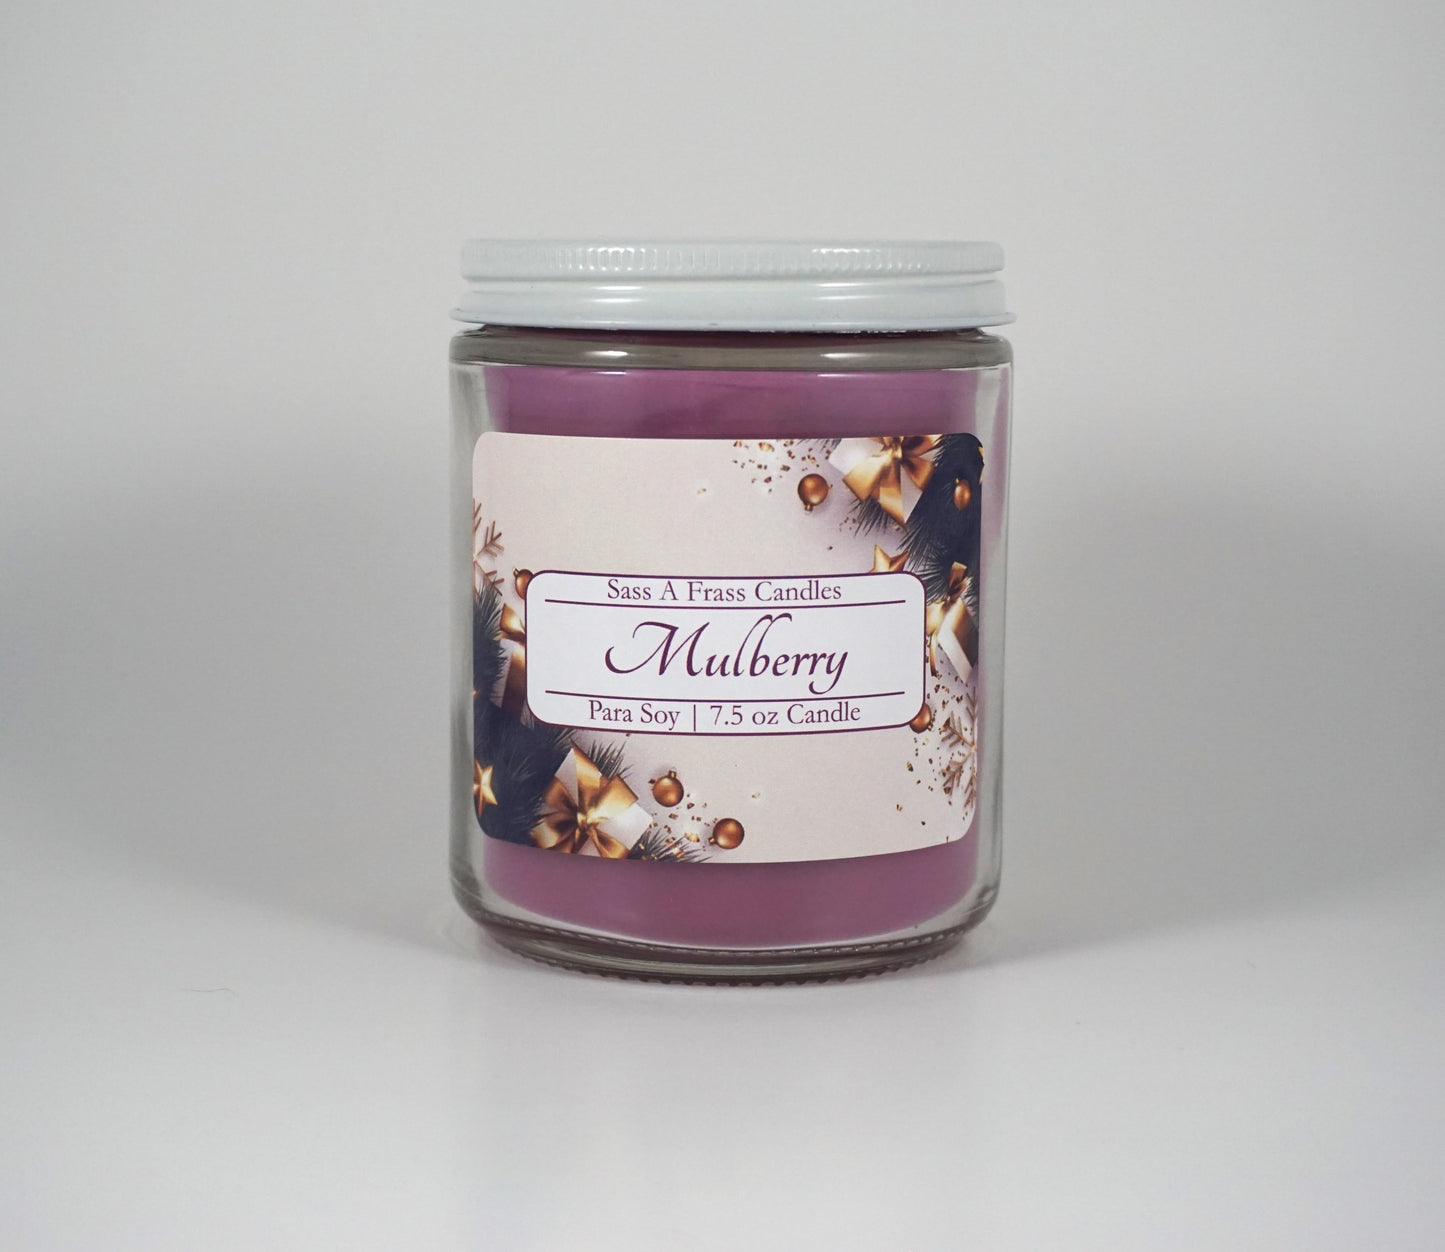 Mulberry 7.5 oz Candle